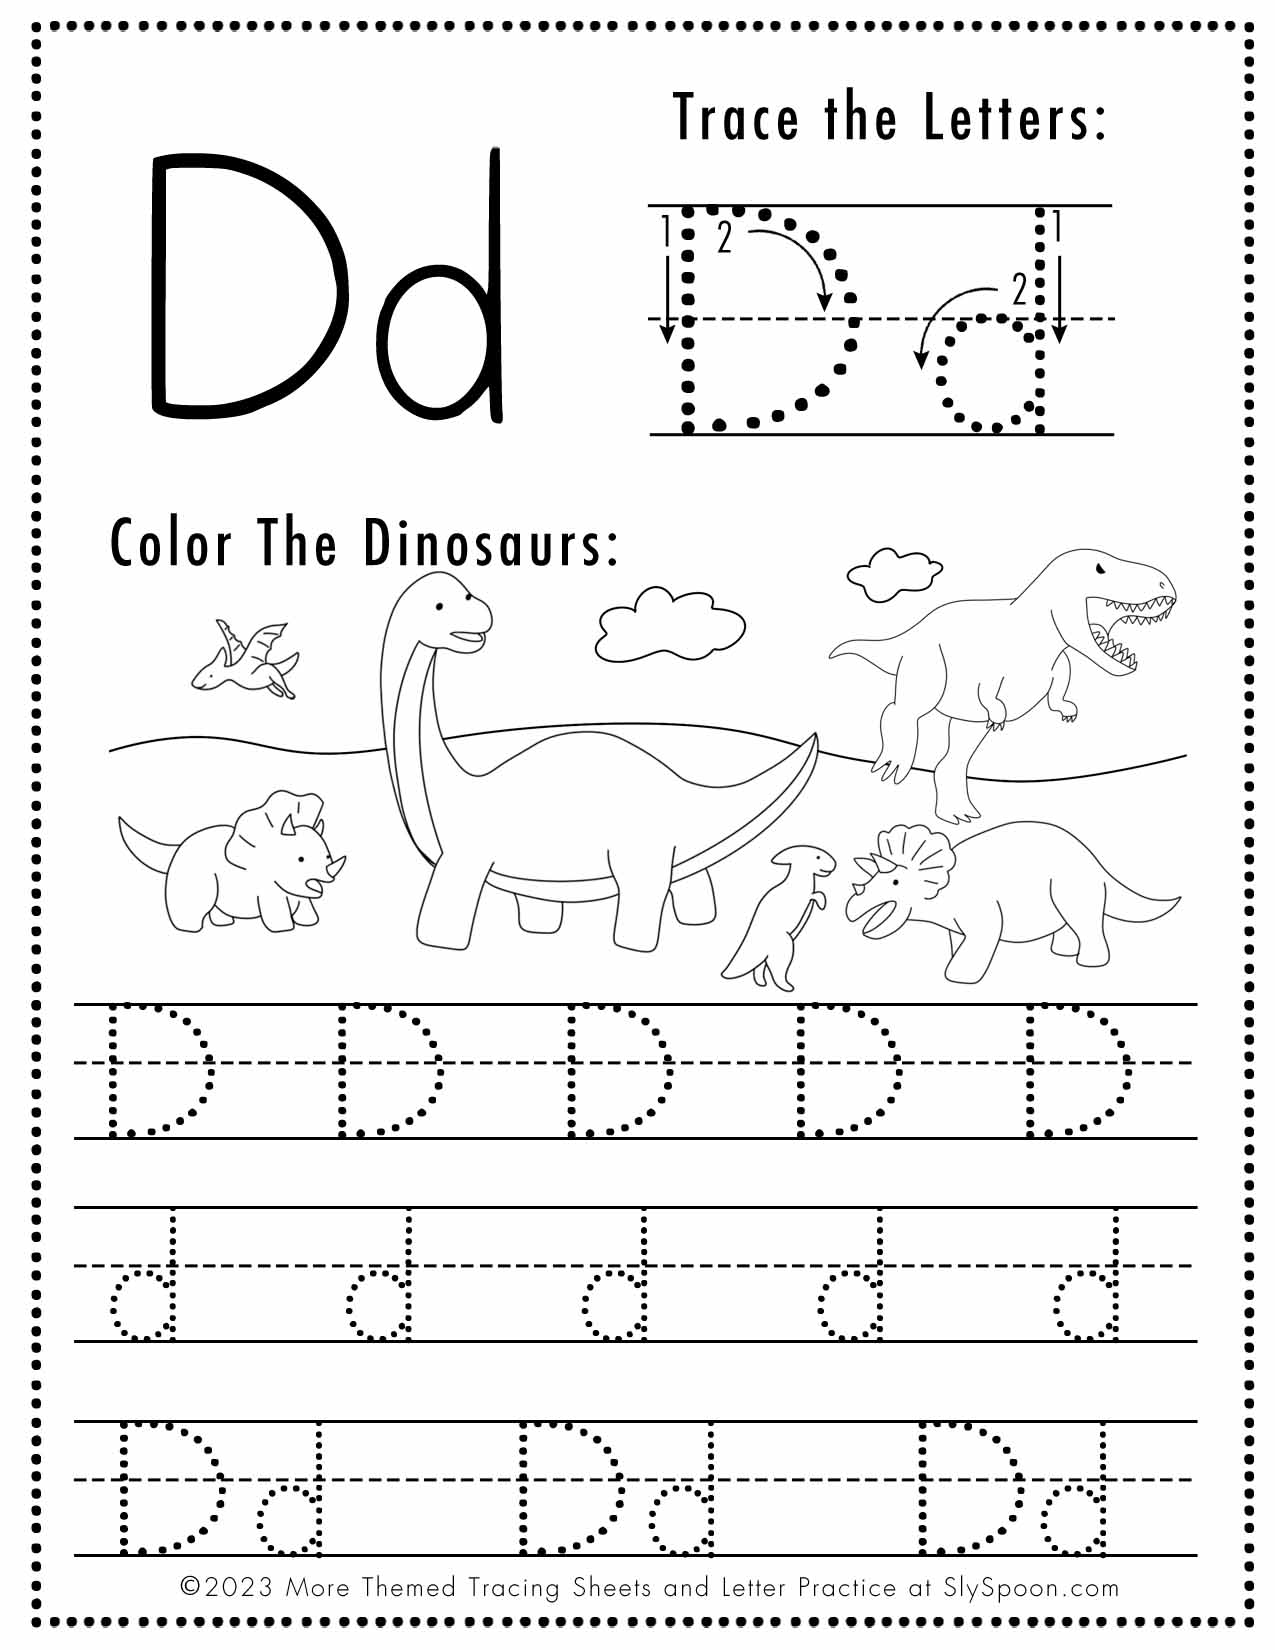 Free Letter D Tracing Worksheet (Printable) Dinosaur Themed - Sly Spoon